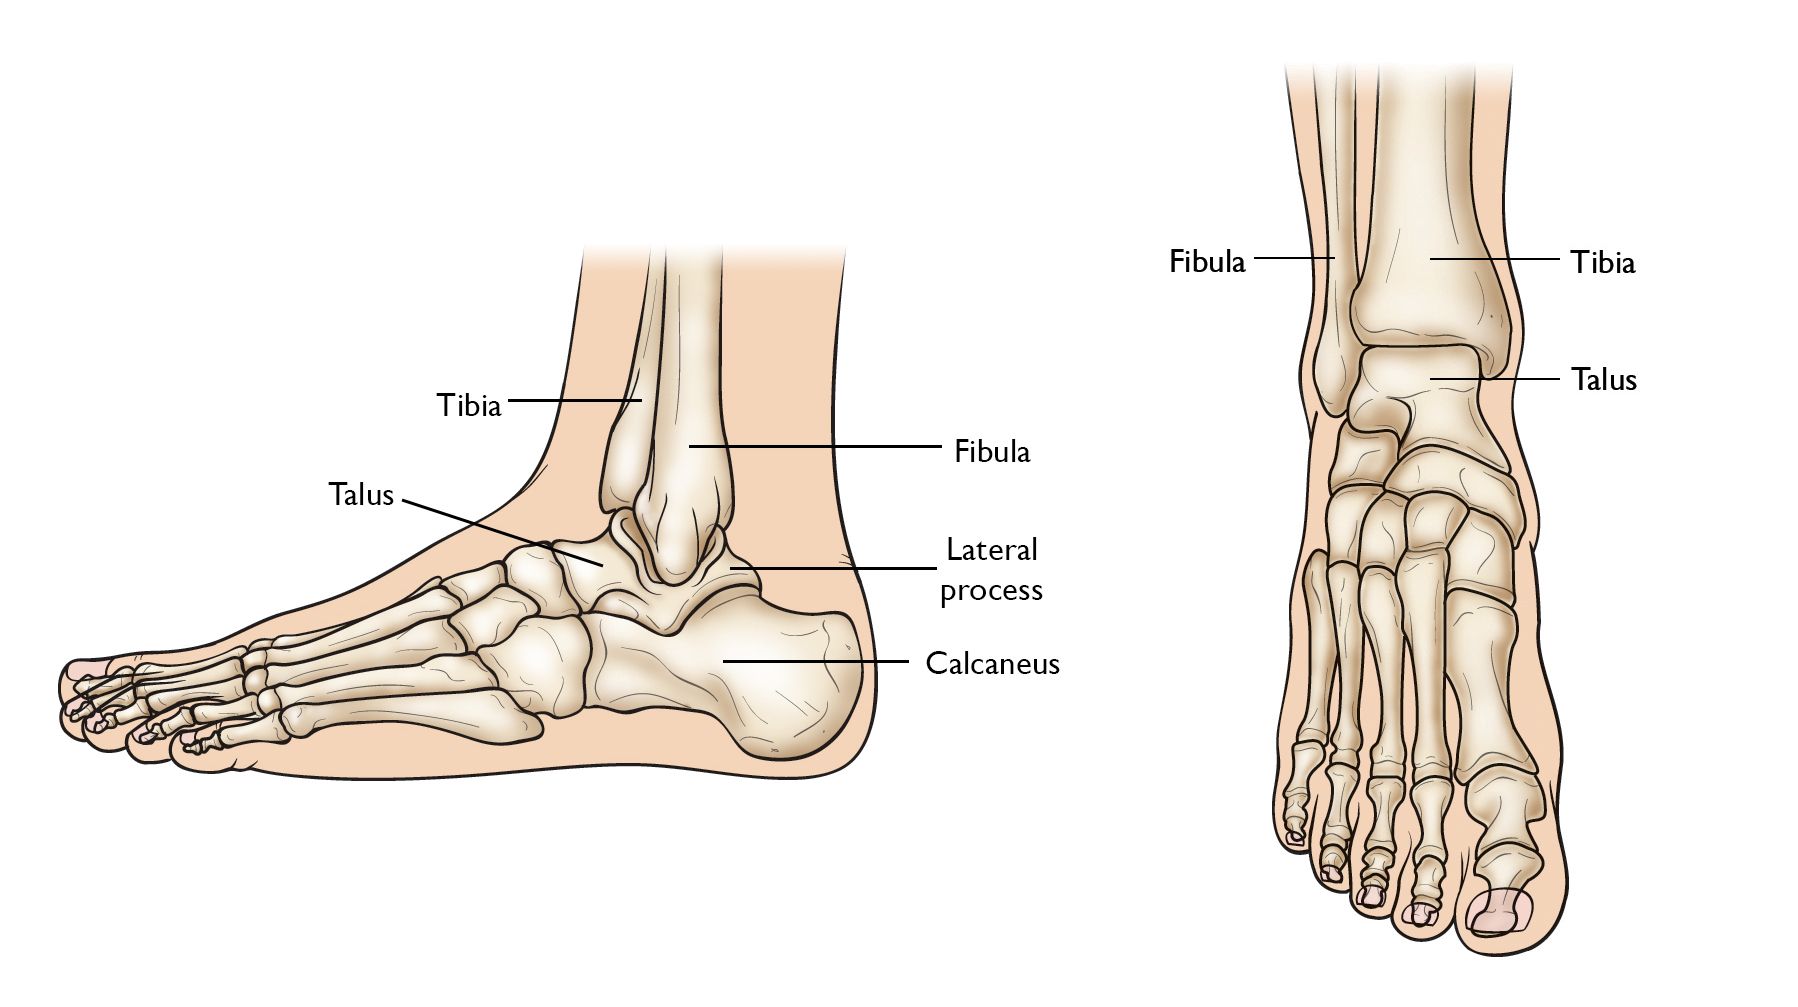 Arab Betydning astronomi Talus Fractures - OrthoInfo - AAOS